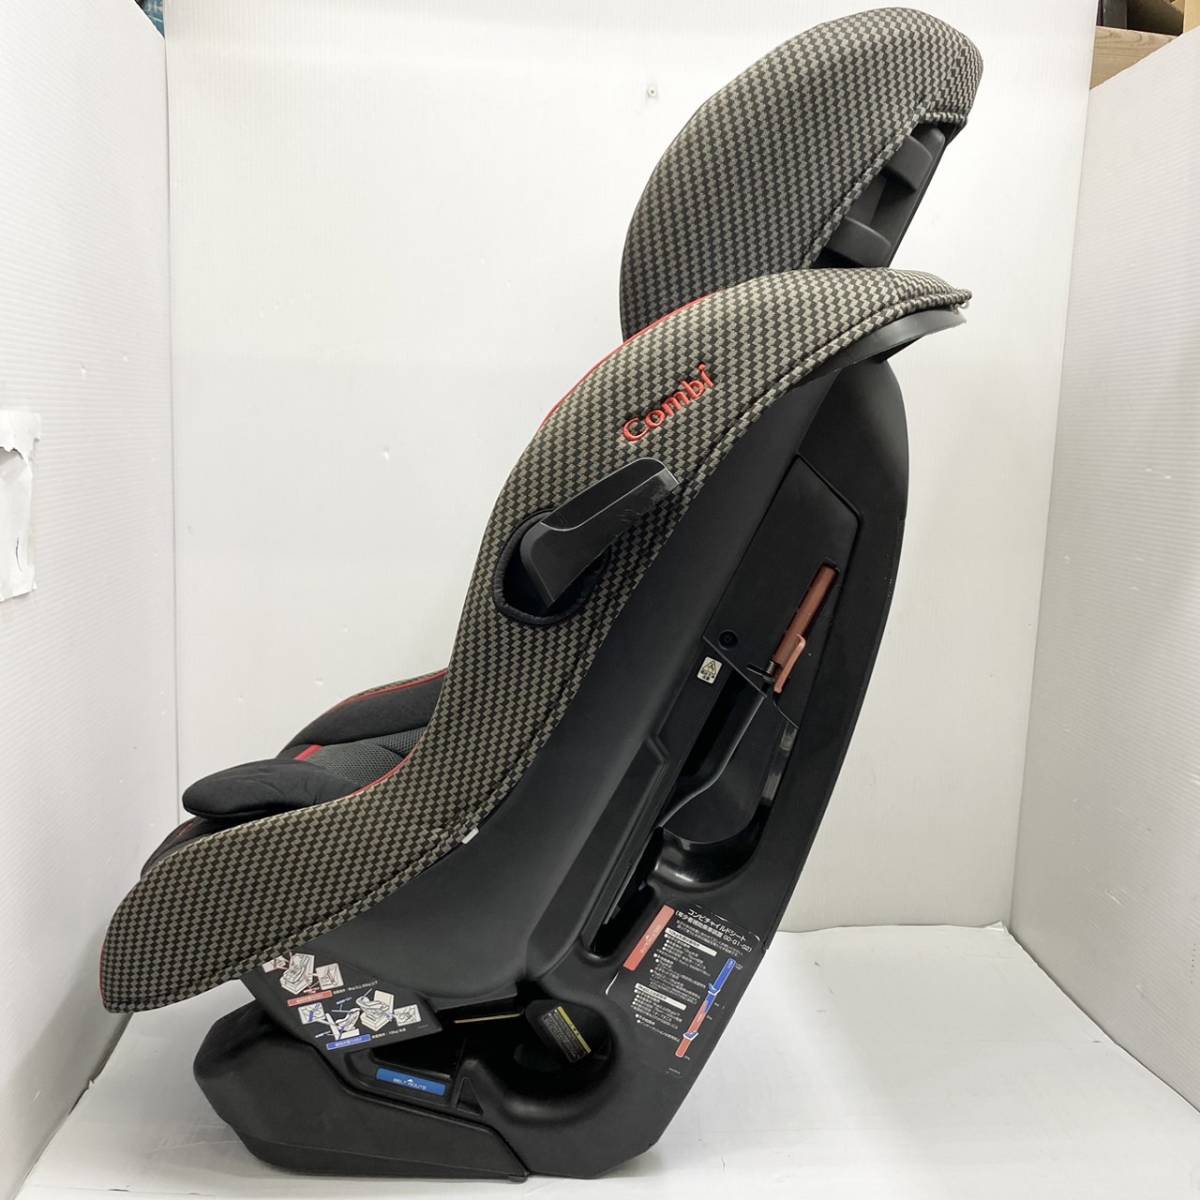  free shipping h55099 combination Combi child seat maru gotoEG CZ-HLB milano black newborn baby ~7 -years old about till 